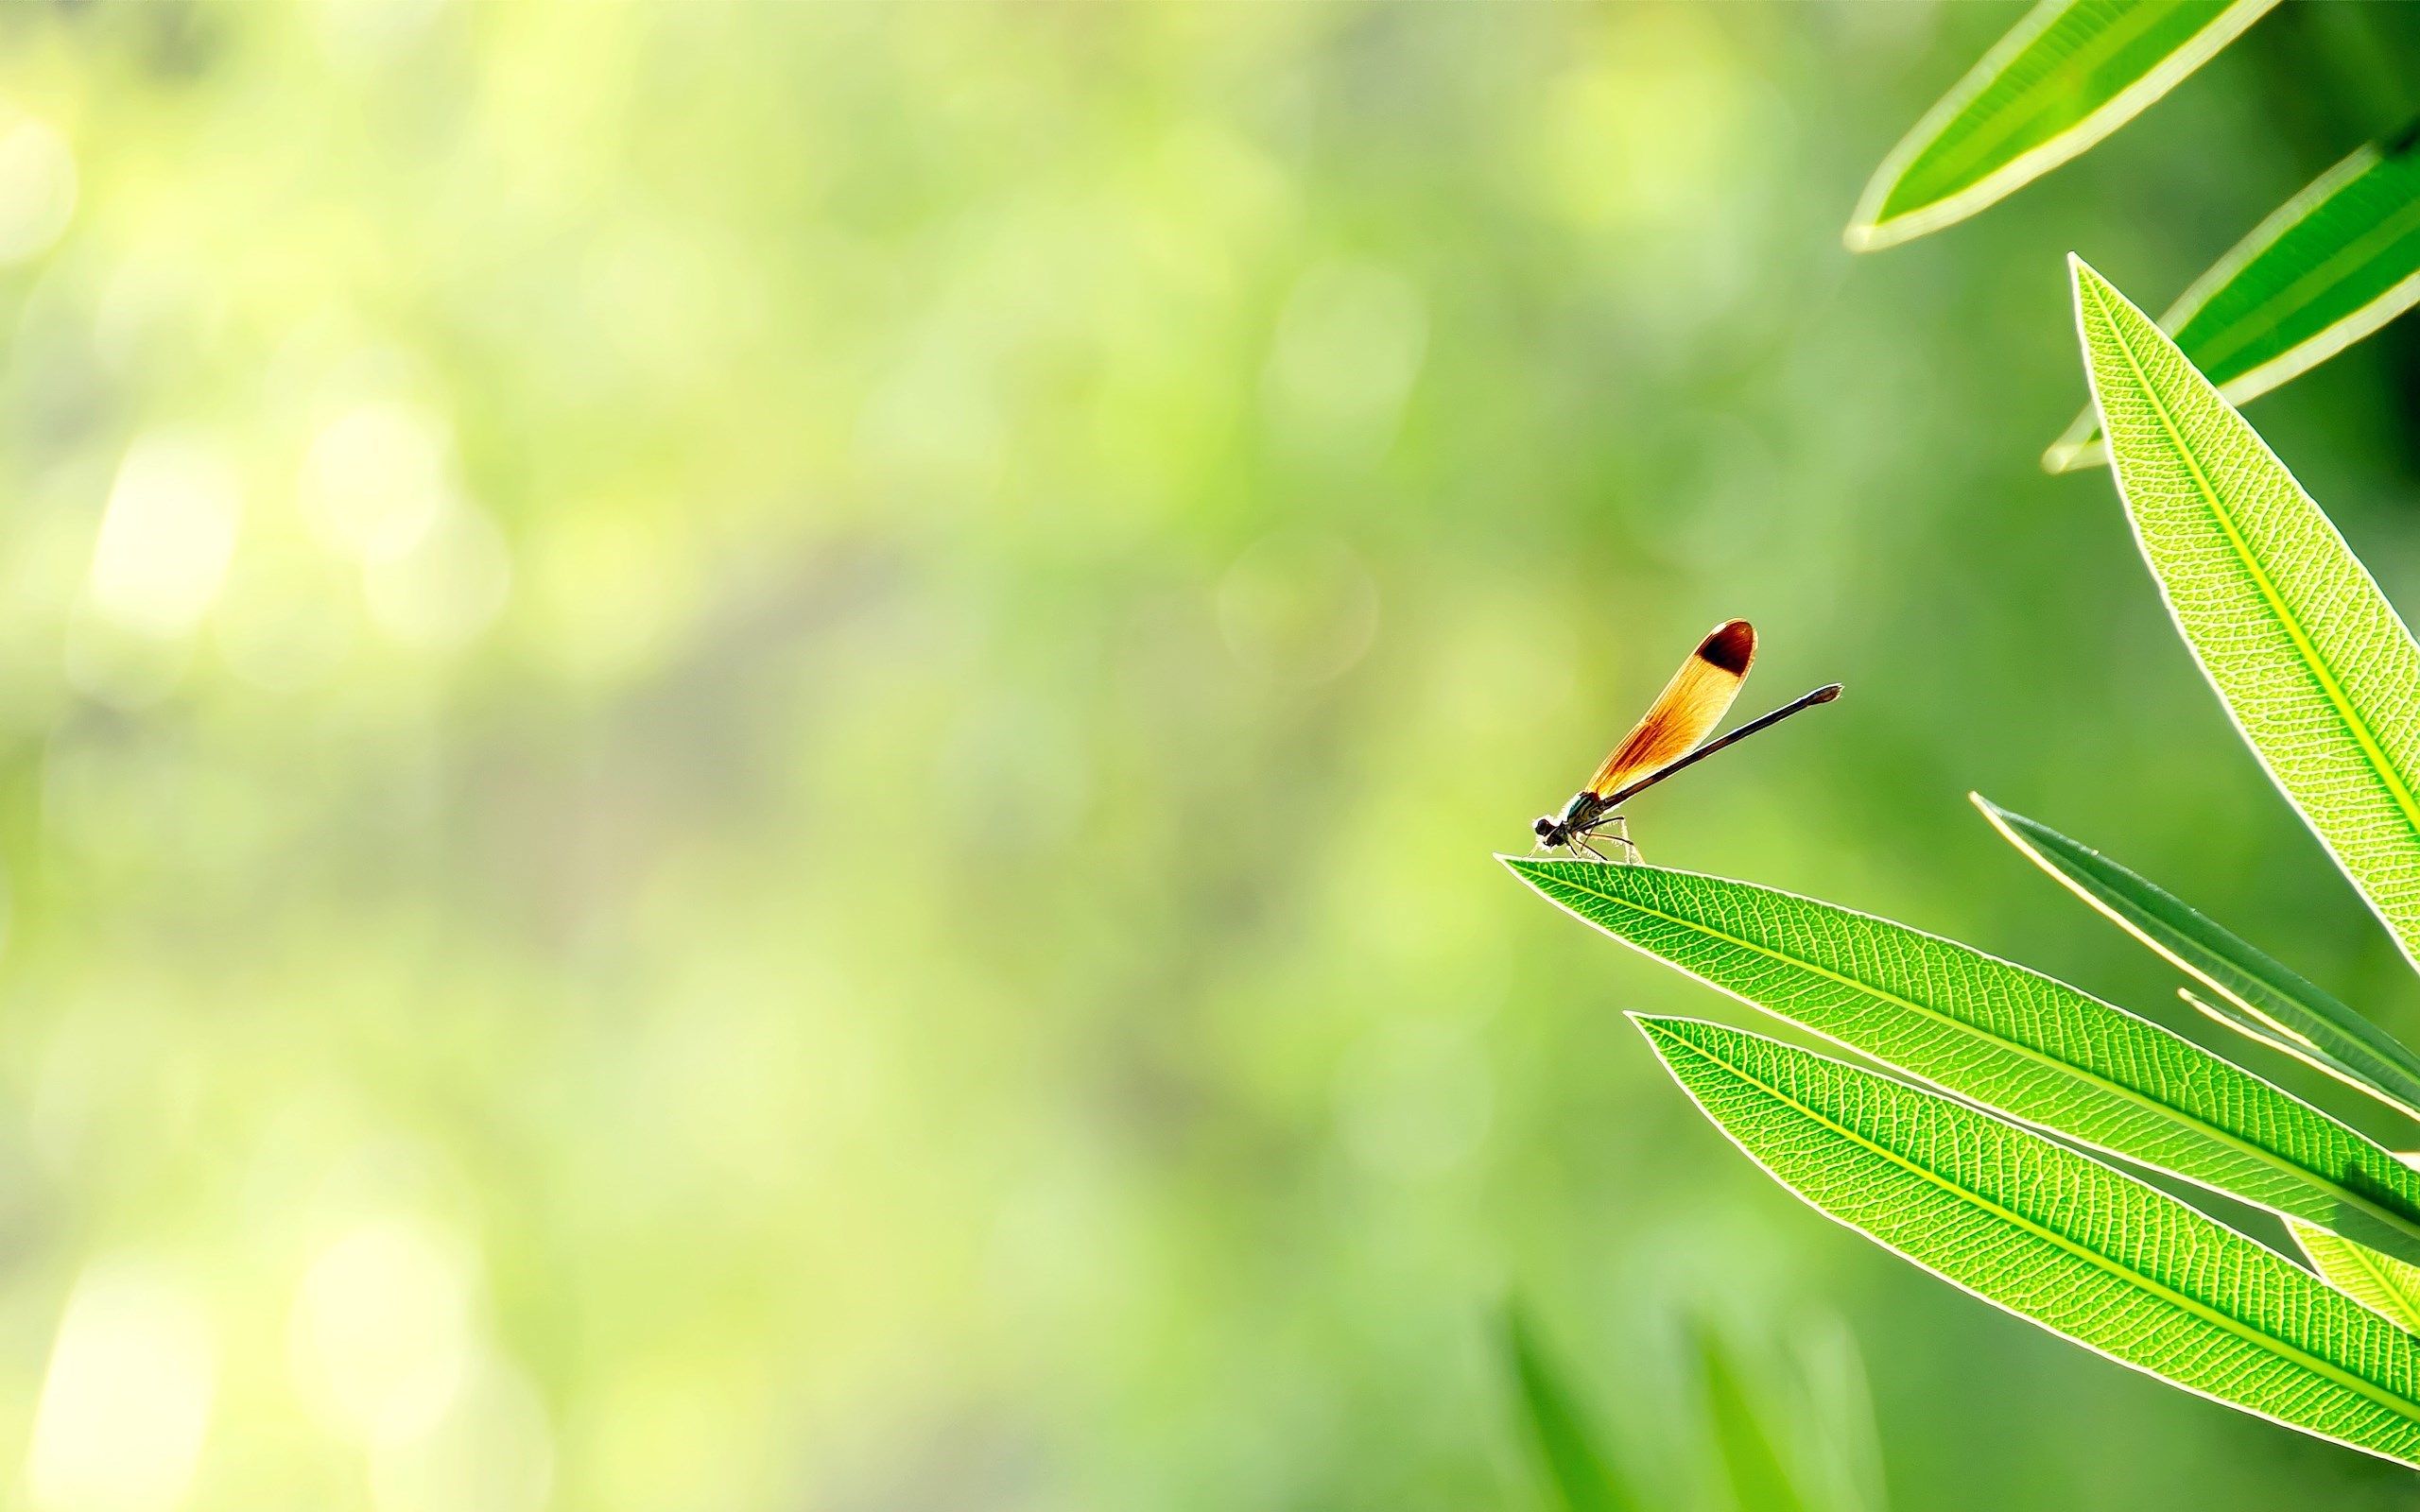 HD wallpaper, Plants, Dragonfly, Nature